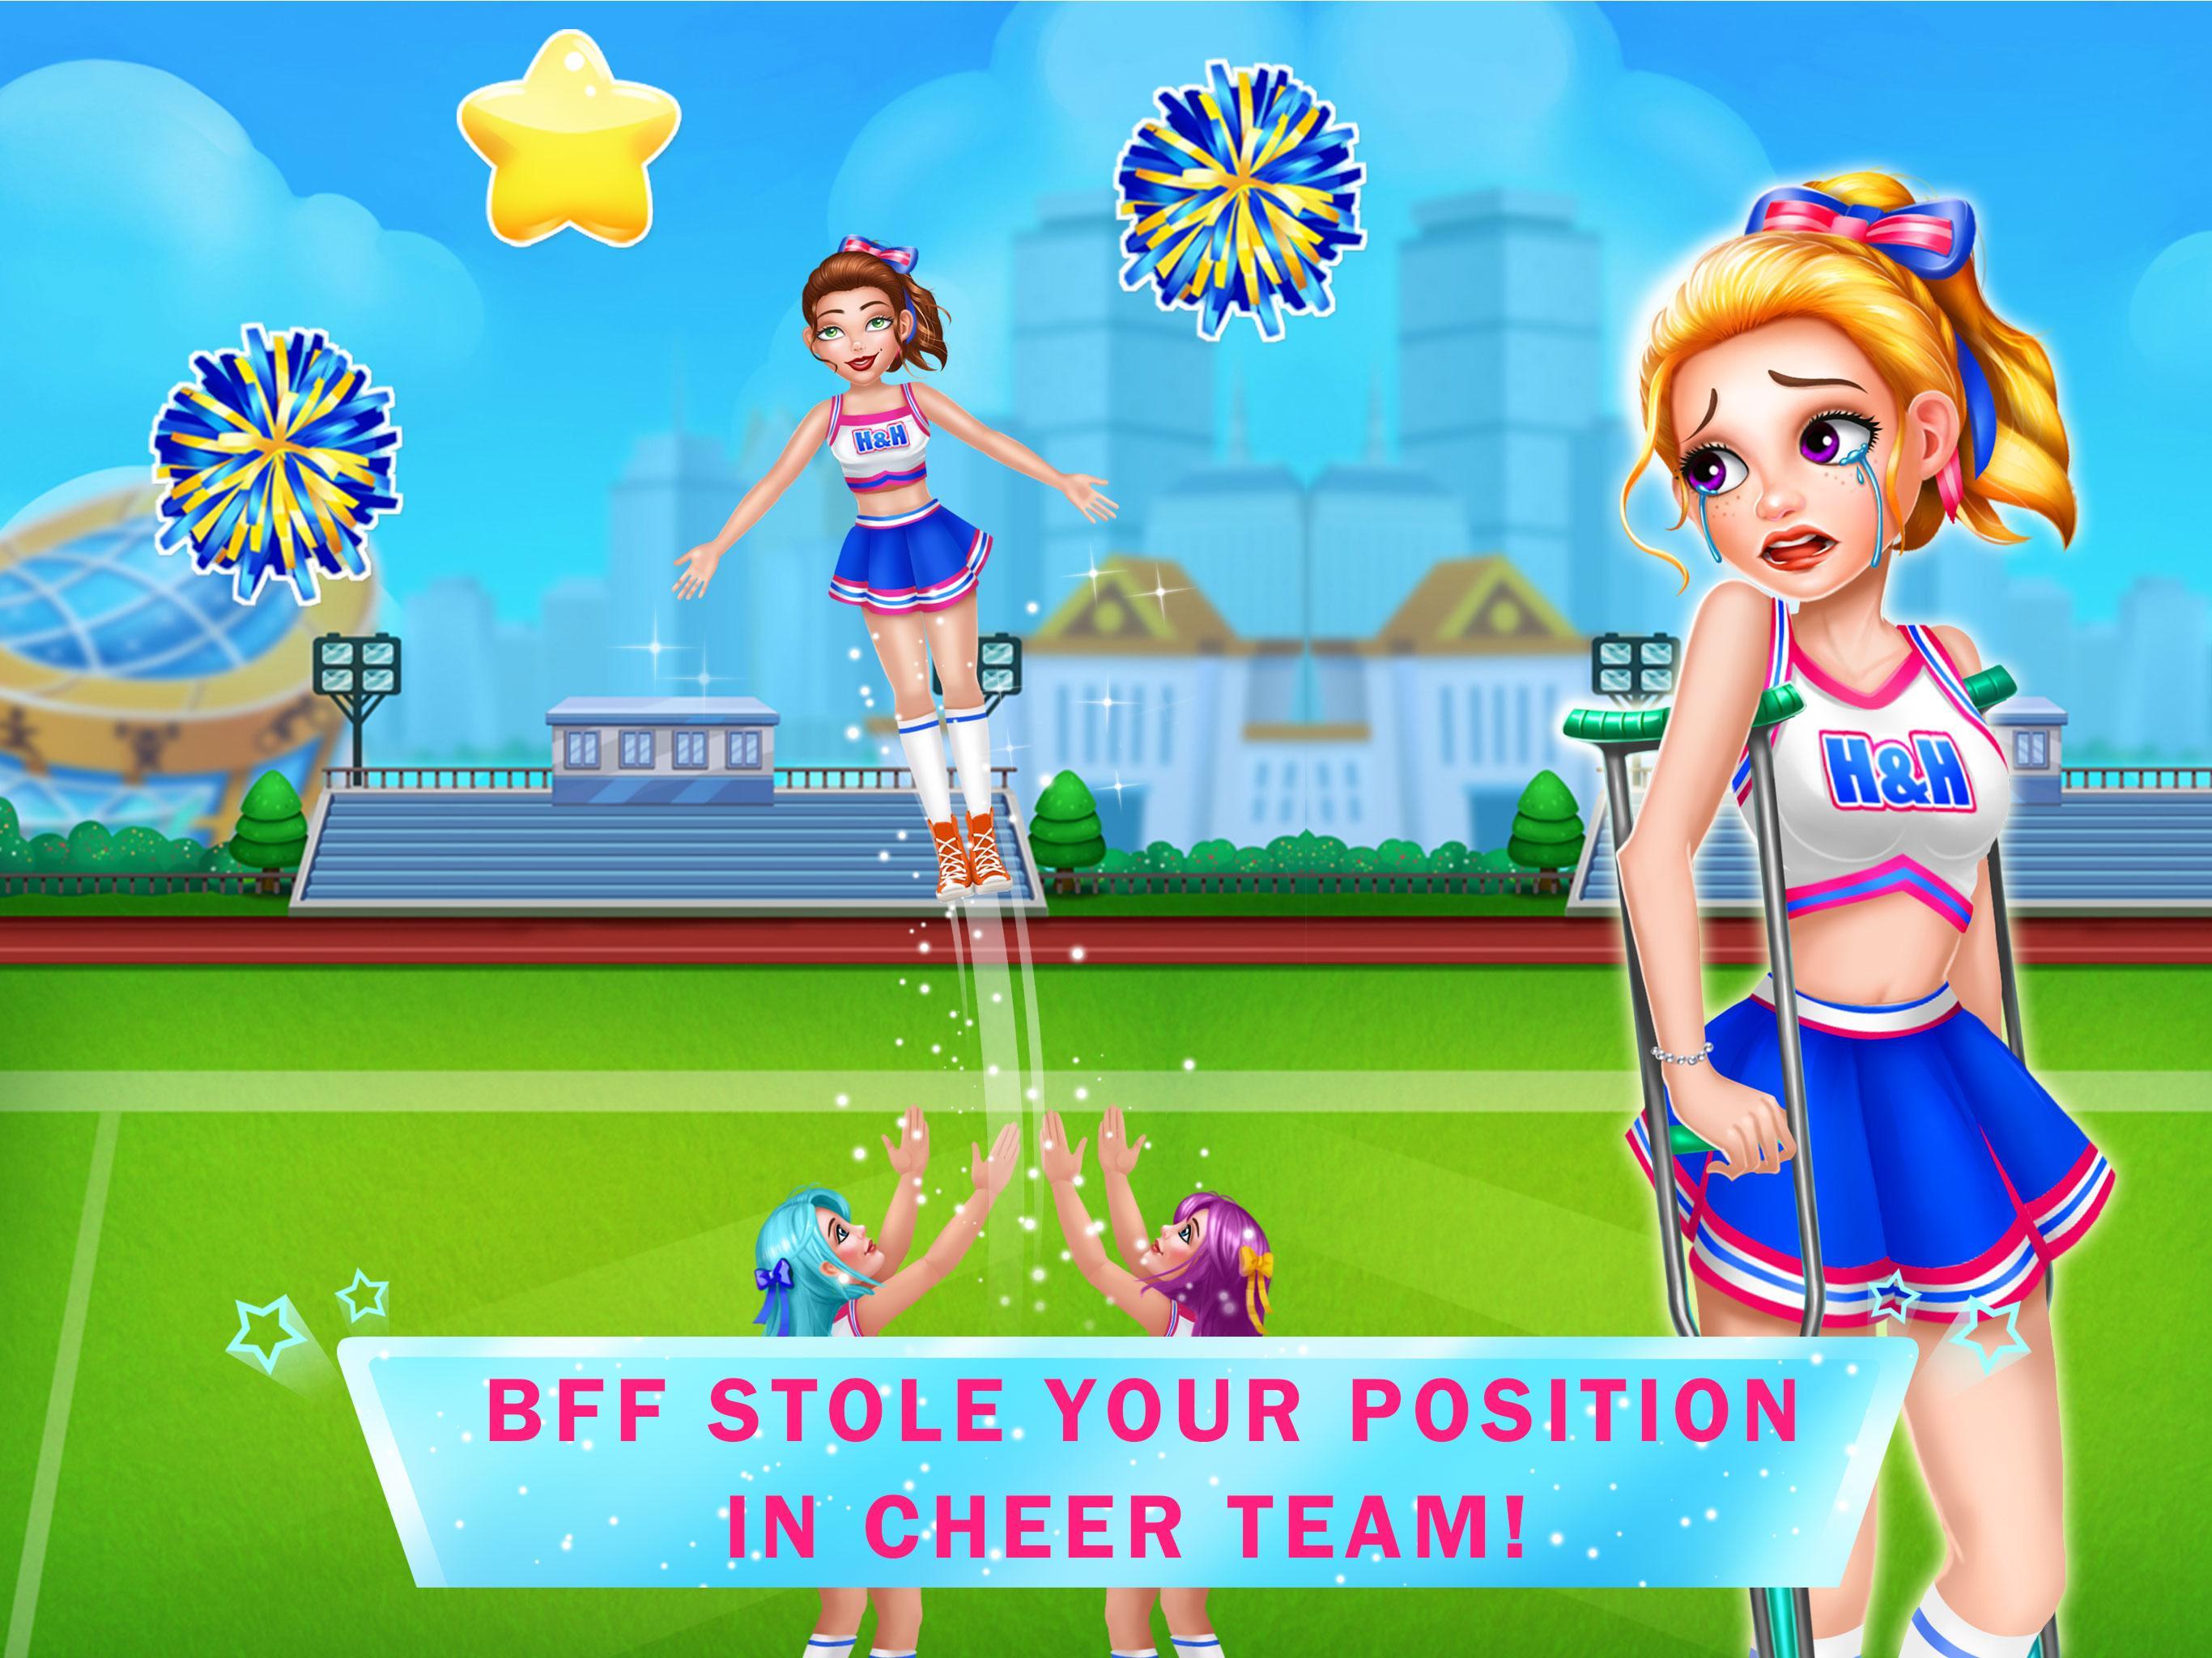 Cheerleader S Revenge 3 Breakup Girl Story Games For Android Apk Download - i am a cheerleader roblox 2